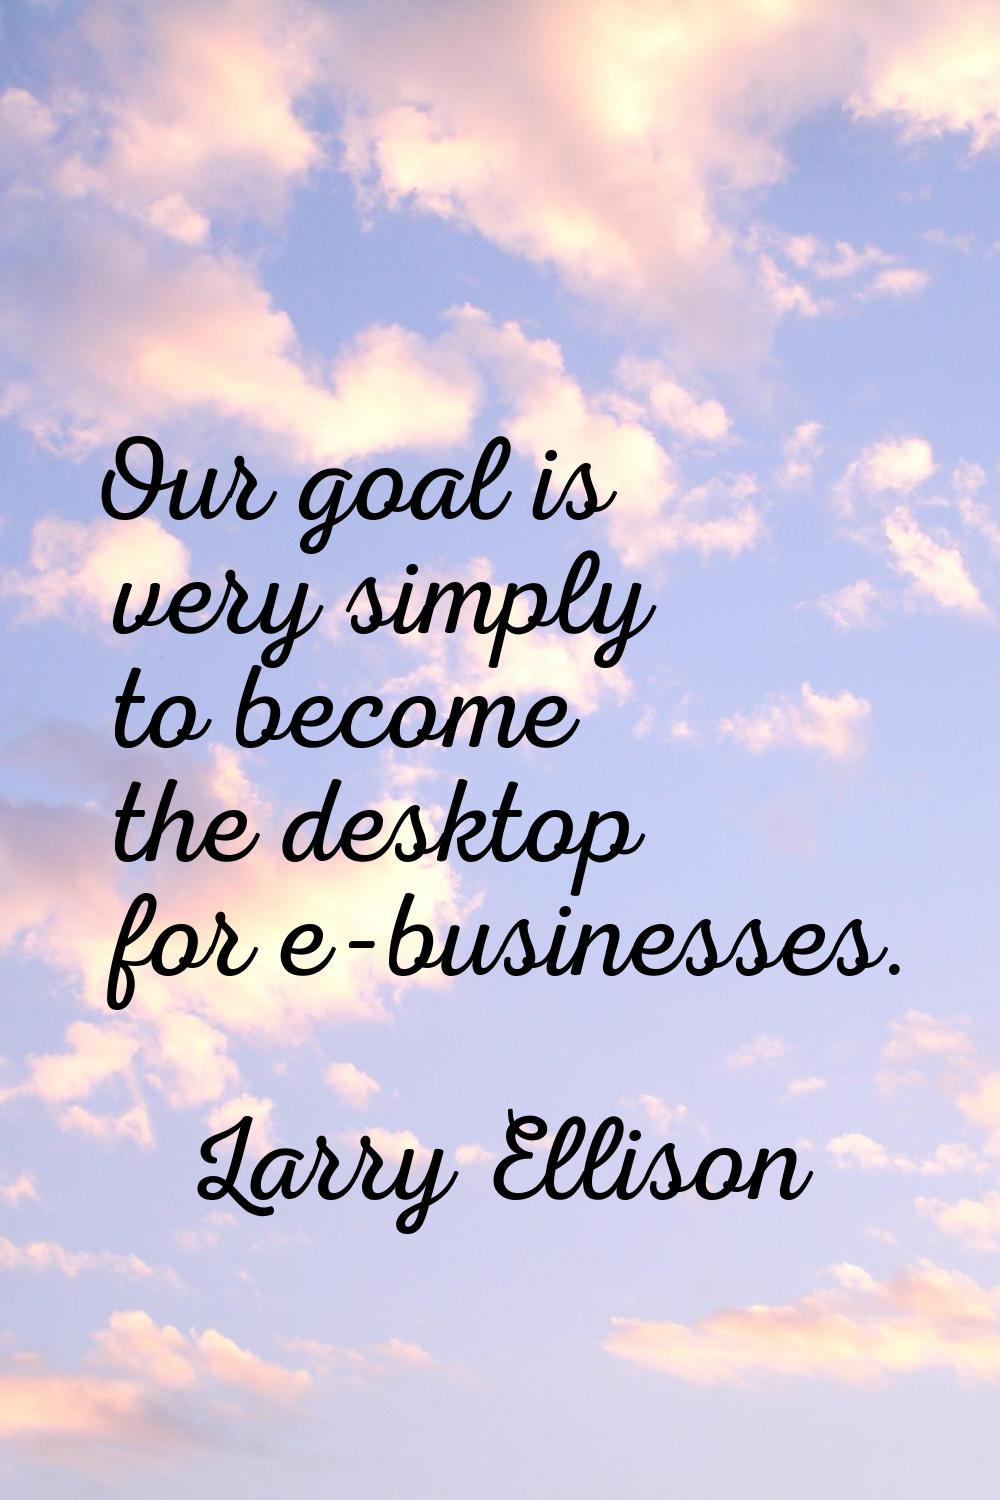 Our goal is very simply to become the desktop for e-businesses.